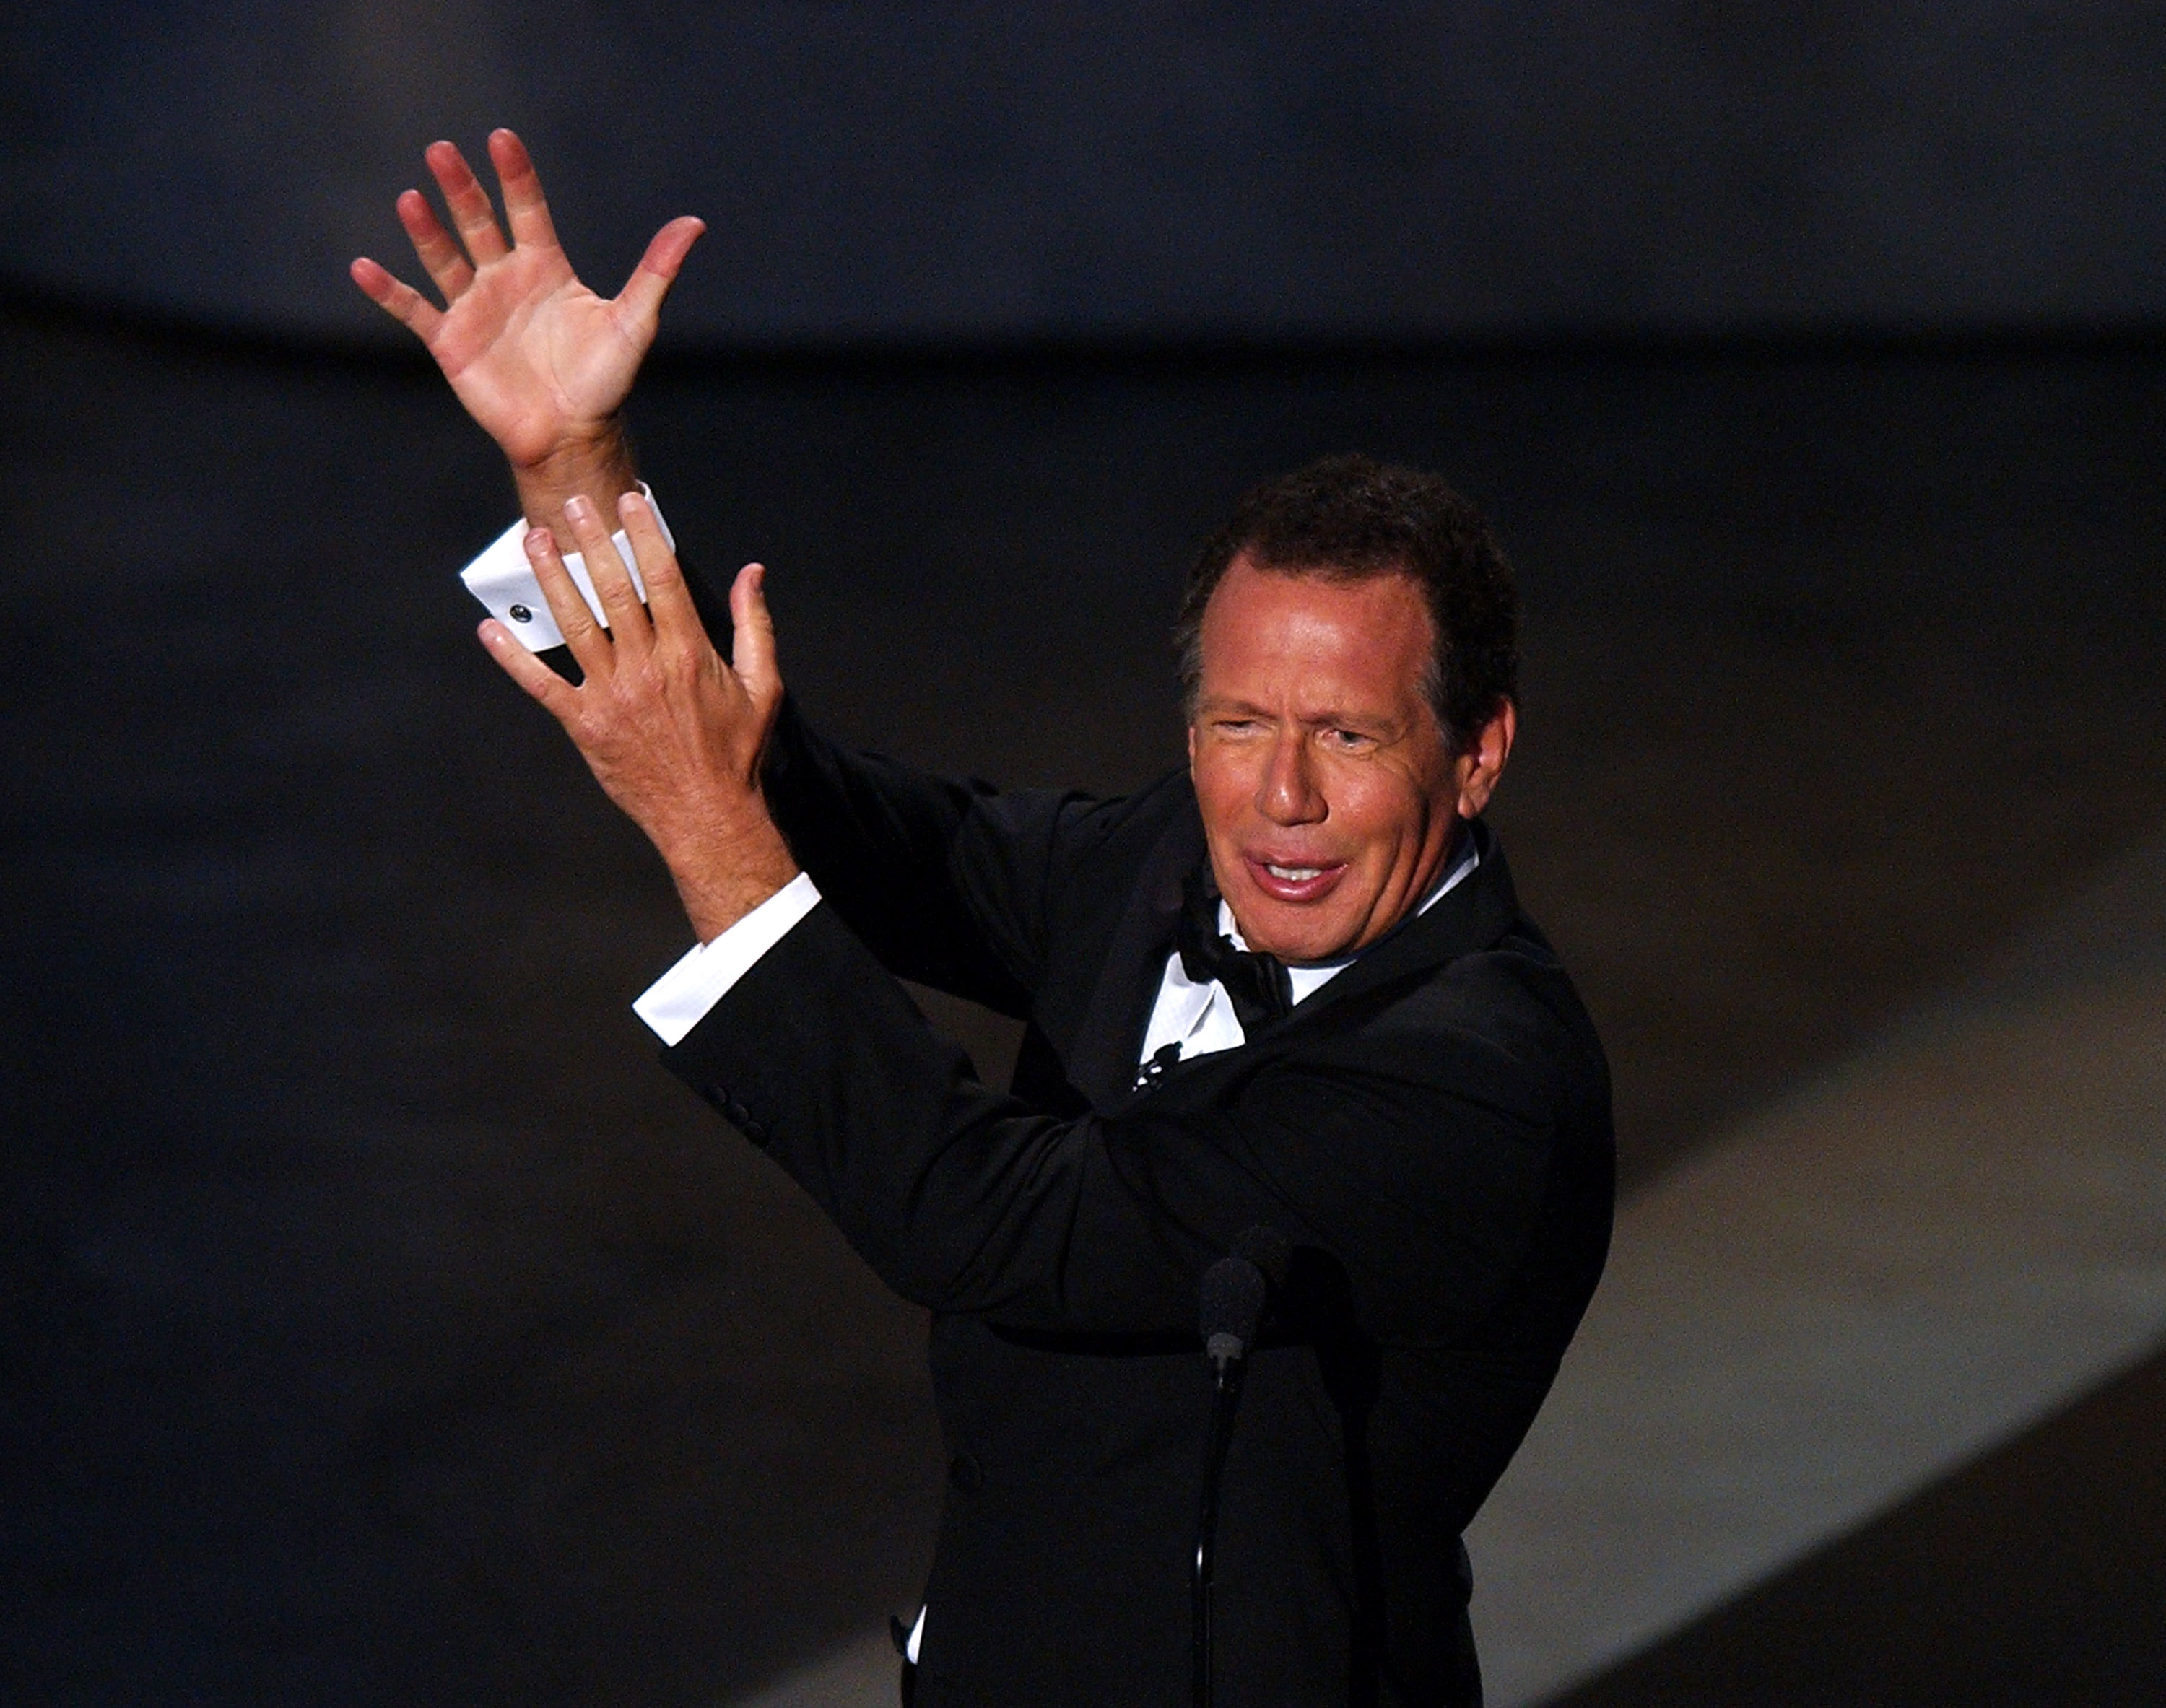 Garry Shandling, who died Mar. 24,  hosting the 56th Annual Primetime Emmy Awards in 2004 (Michael Caulfield Archive—WireImage)